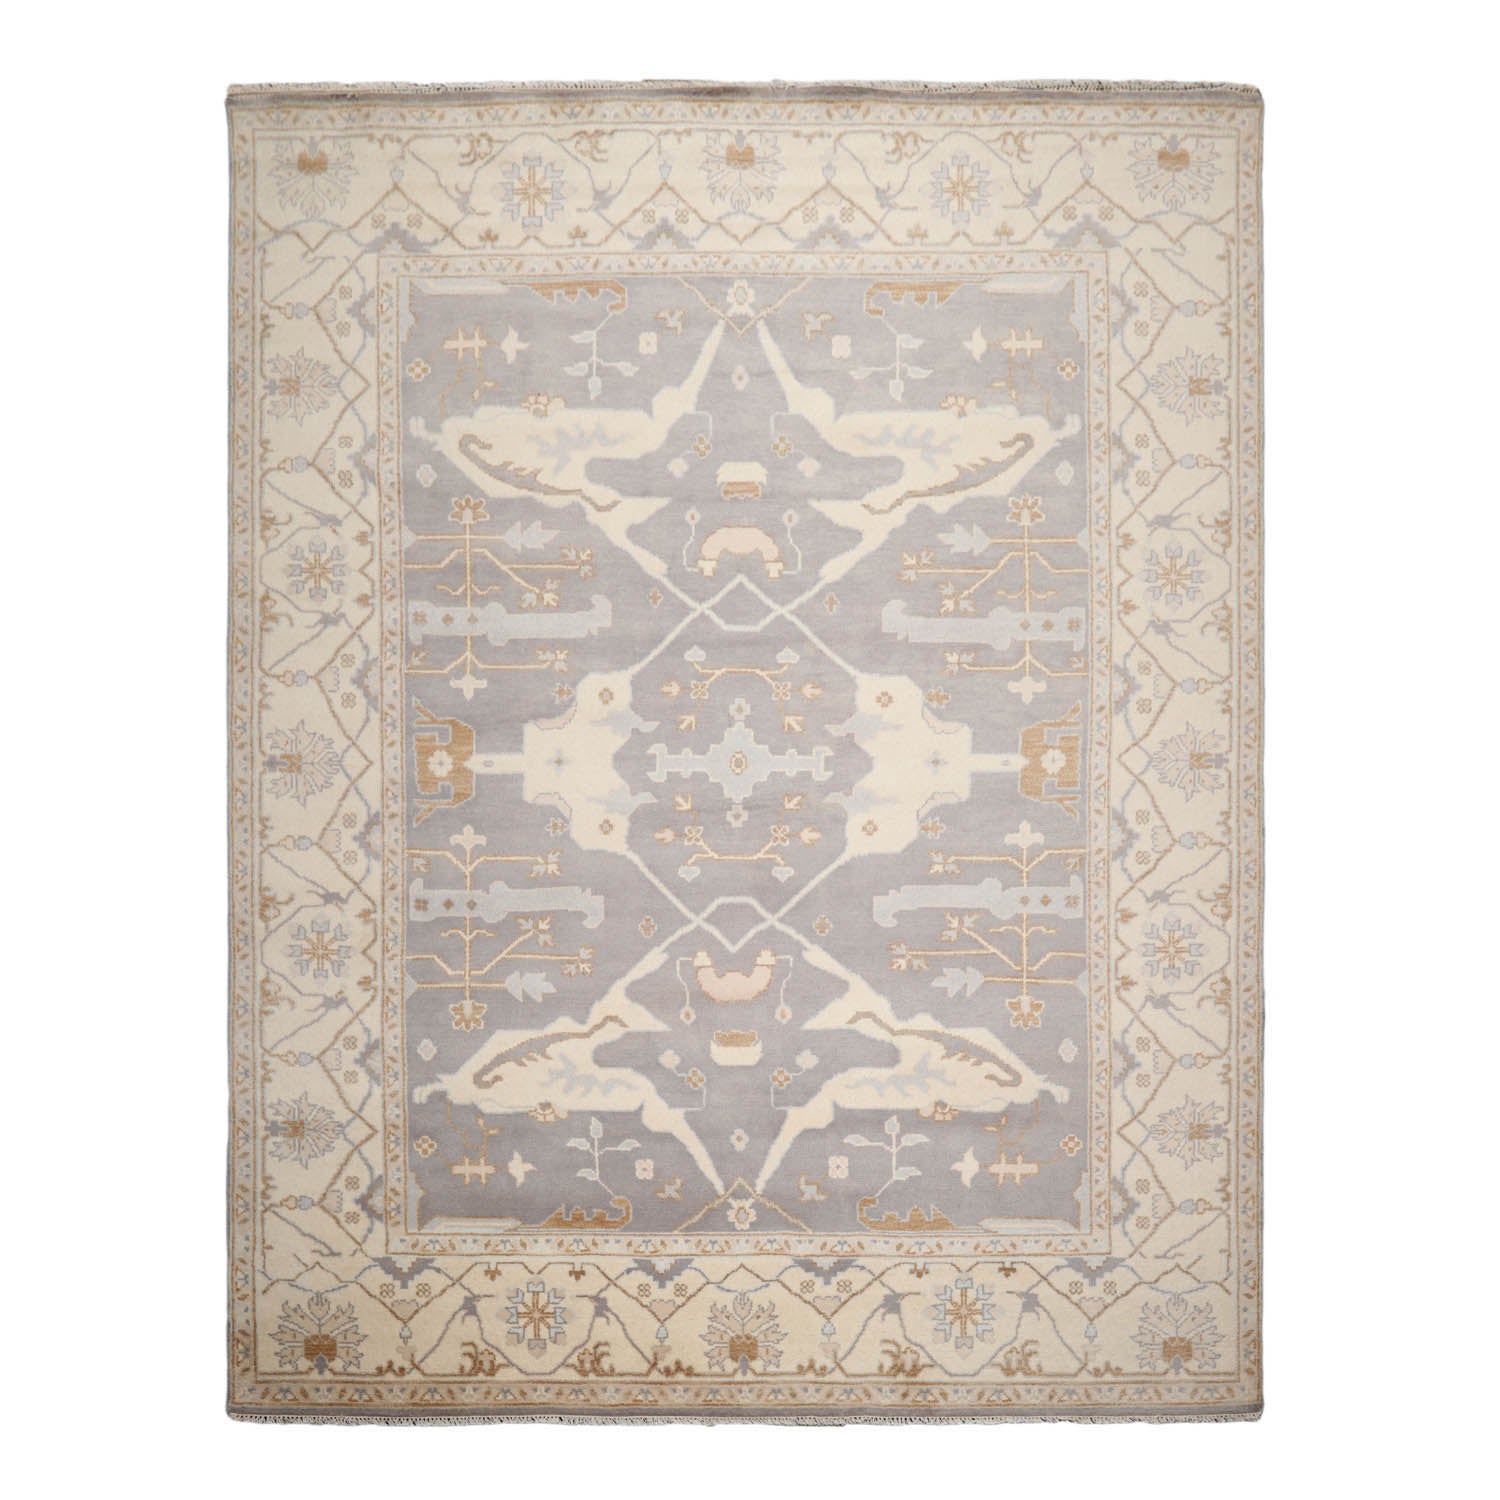 Smithey 9x12 Hand Knotted 100% Wool Oushak Traditional Oriental Area Rug Gray, Ivory Color